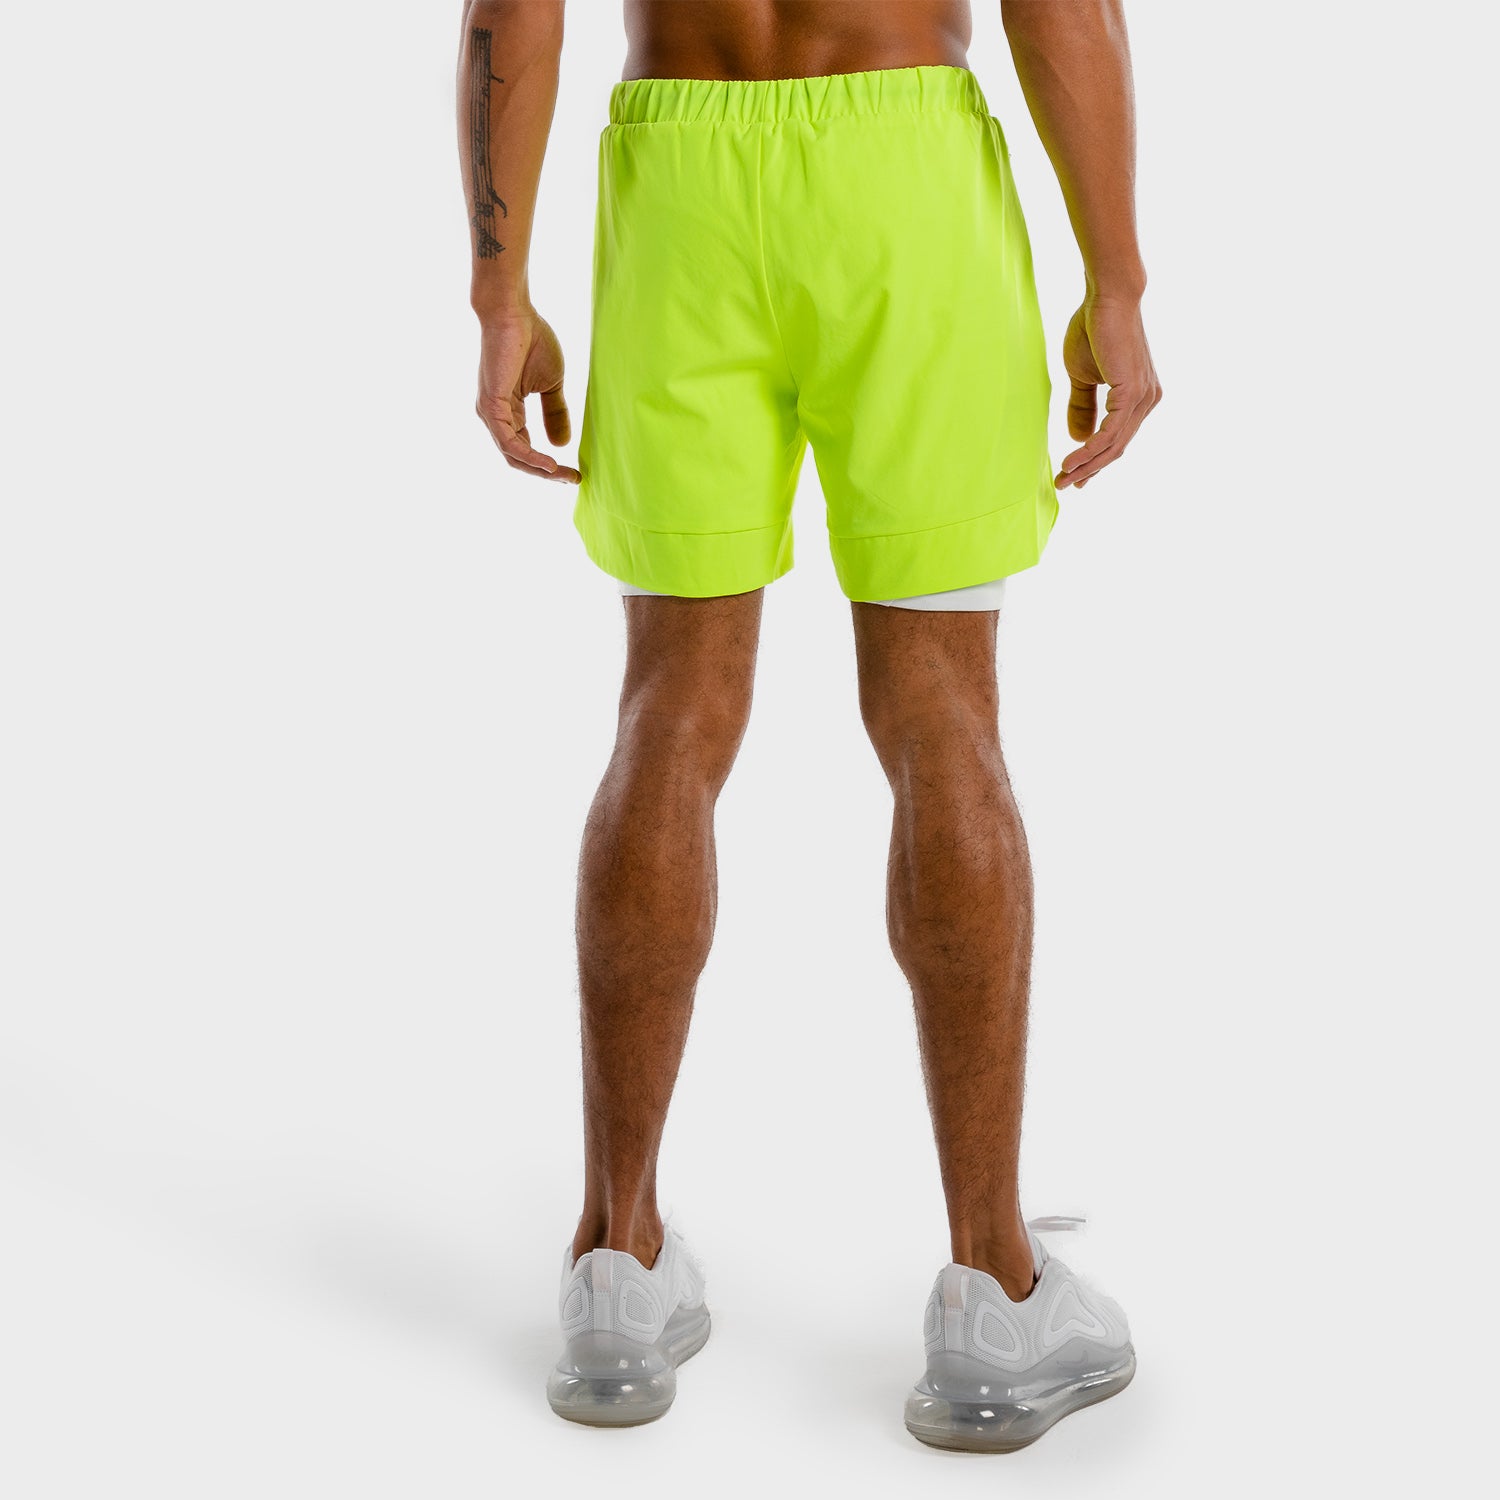 squatwolf-workout-short-for-men-limitless-2-in-1-shorts-neon-white-gym-wear